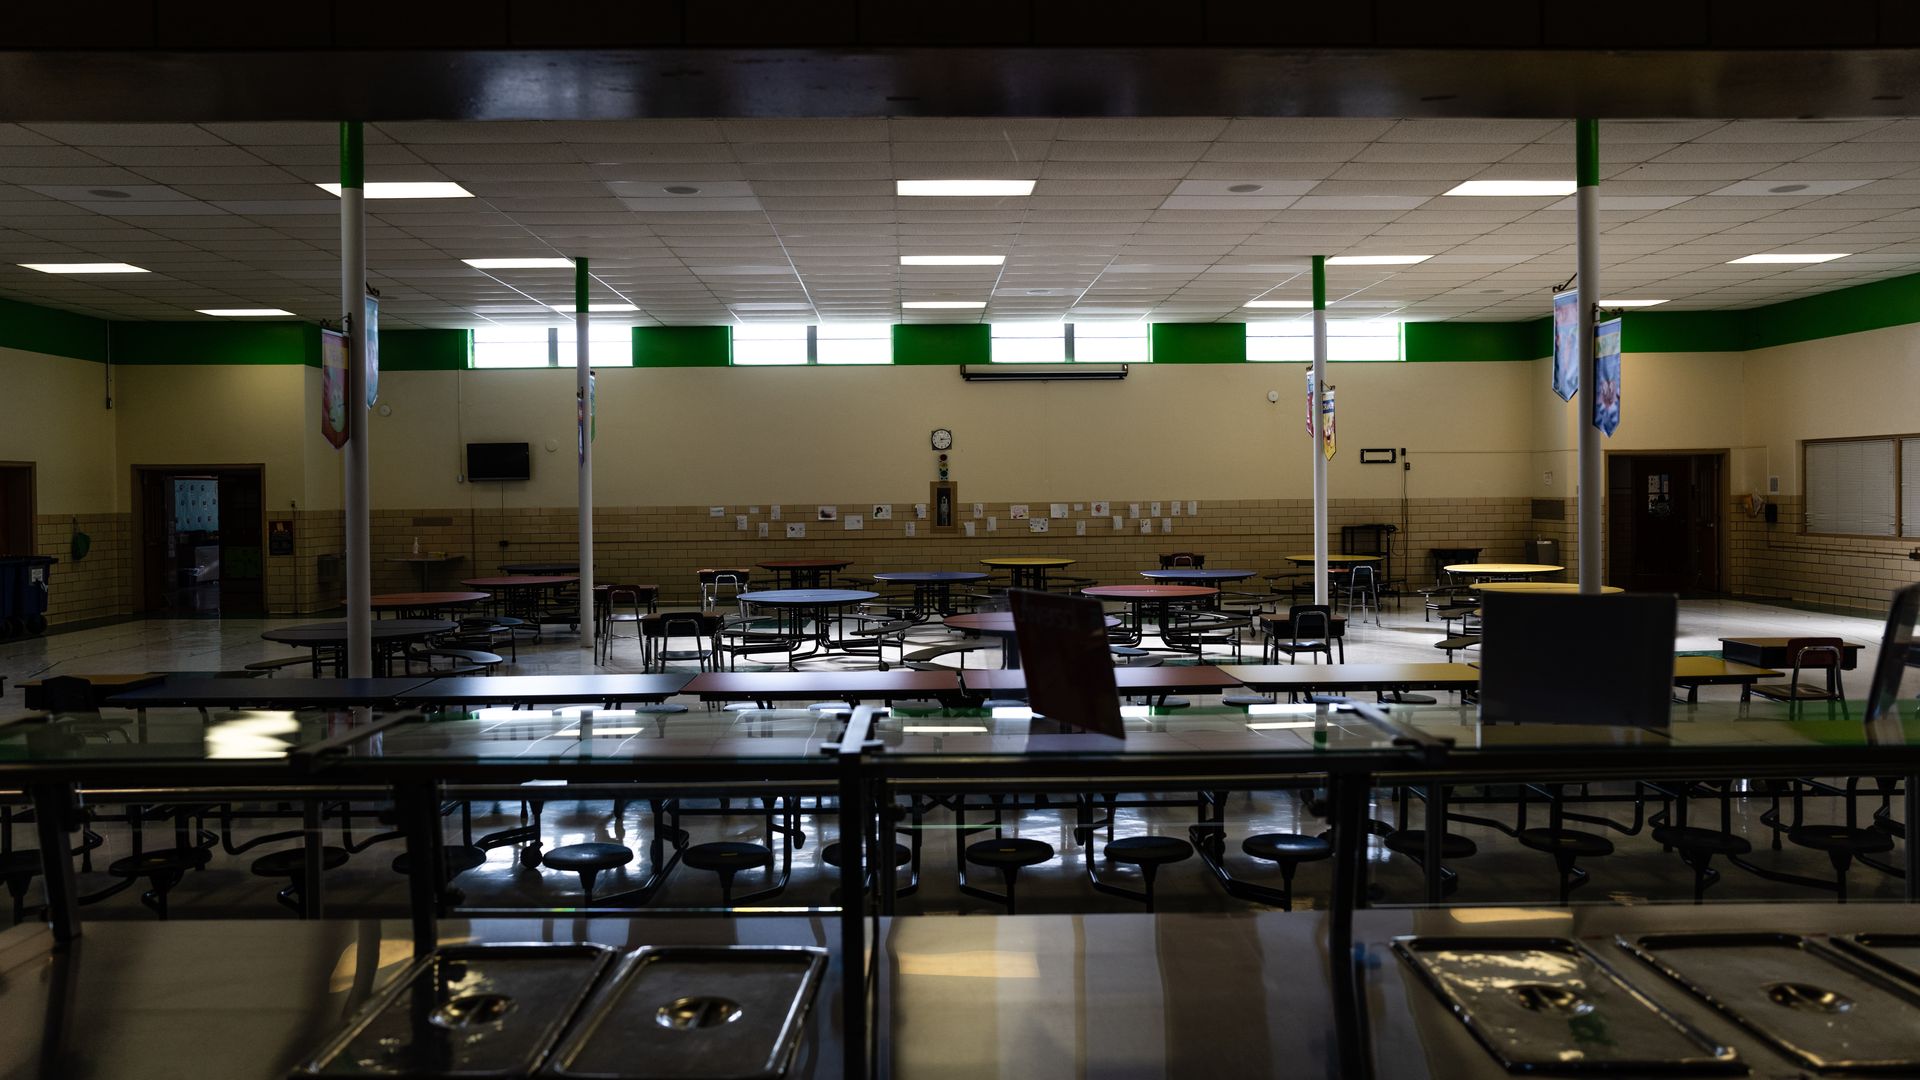 Unused lunch tables are seen in an empty cafeteria during a period of Non-Traditional Instruction (NTI) at Hazelwood Elementary School on January 11, 2022 in Louisville, Kentucky.